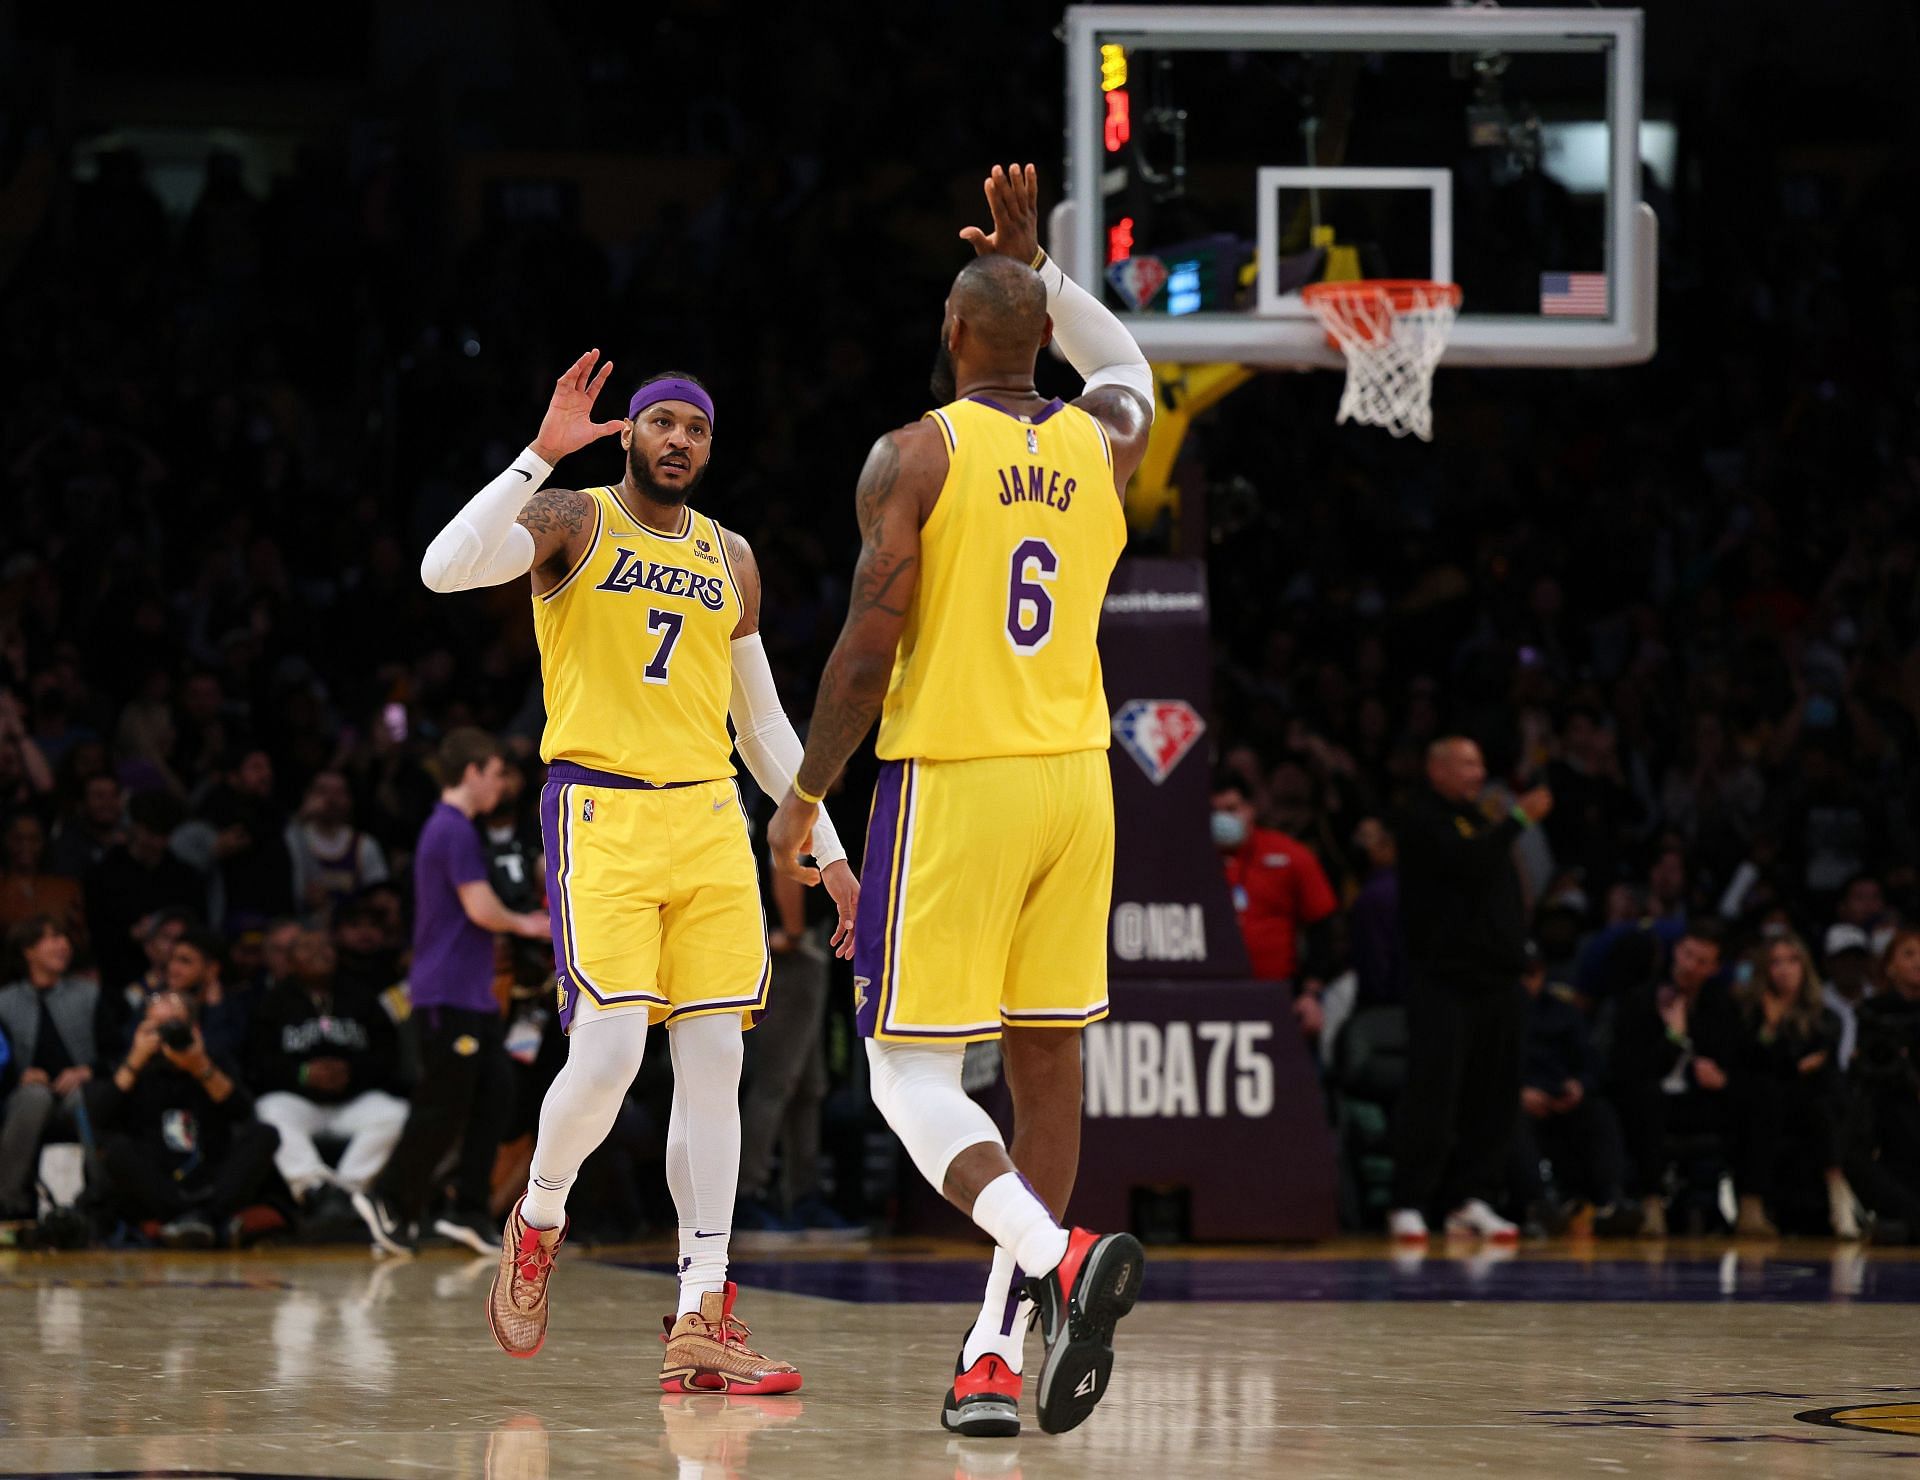 Los Angeles Lakers superstars LeBron James and Carmelo Anthony